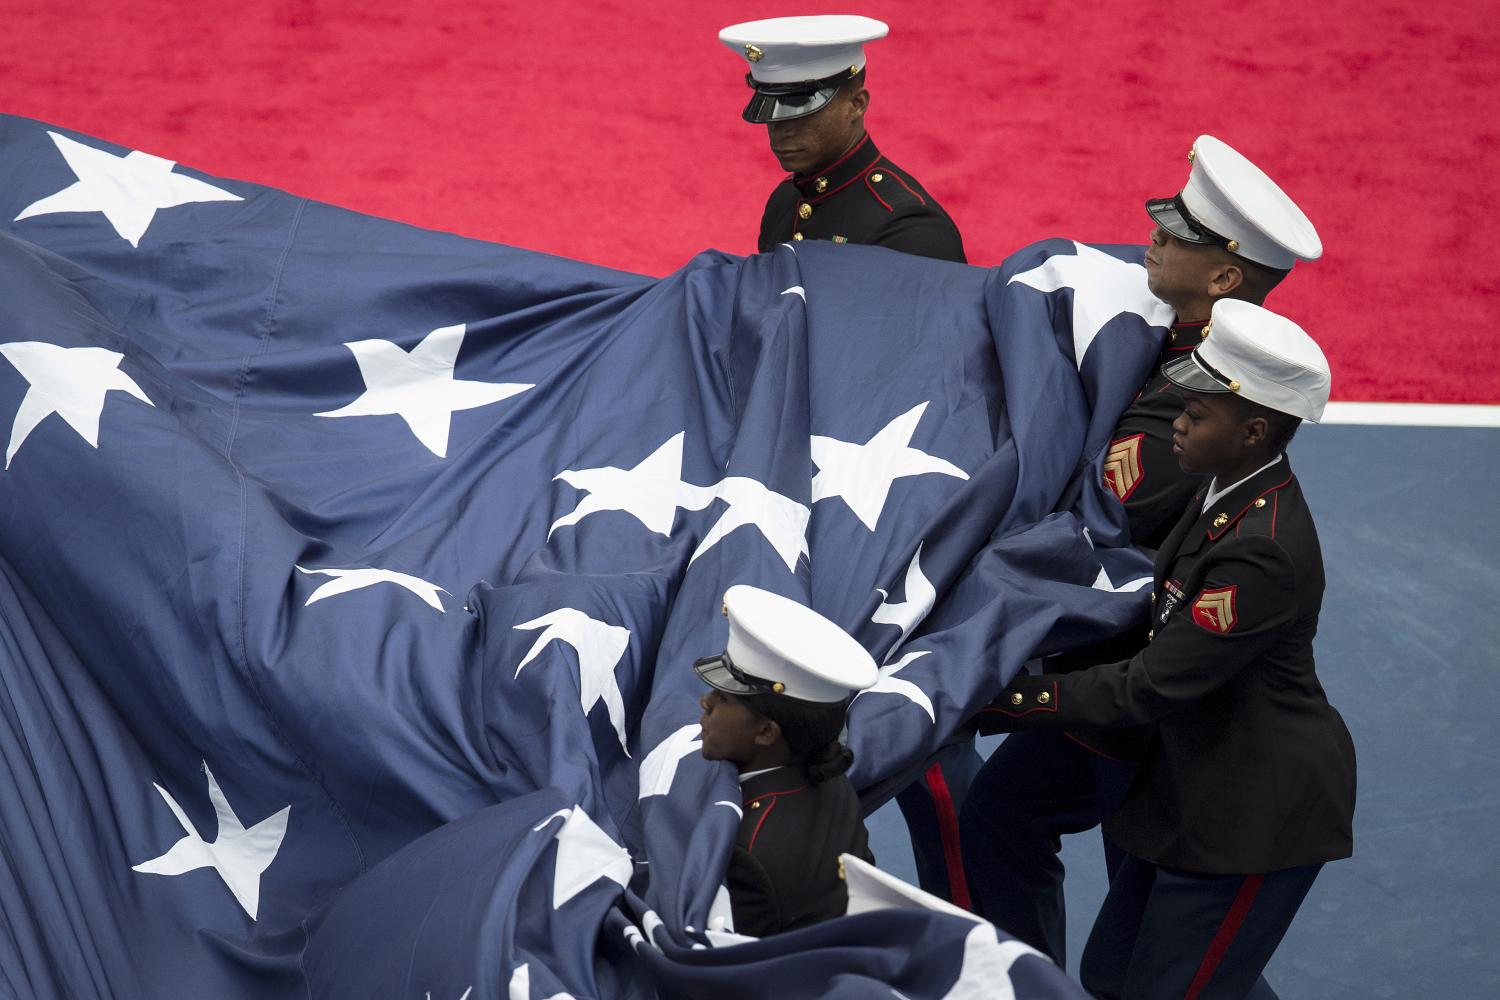 Members of the U.S. Marine Corps gather up a large U.S. flag before the Flavia Pennetta versus Roberta Vinci women's singles final match at the U.S. Open tennis tournament in New York, September 12, 2015. REUTERS/Carlo Allegri - GF10000203824